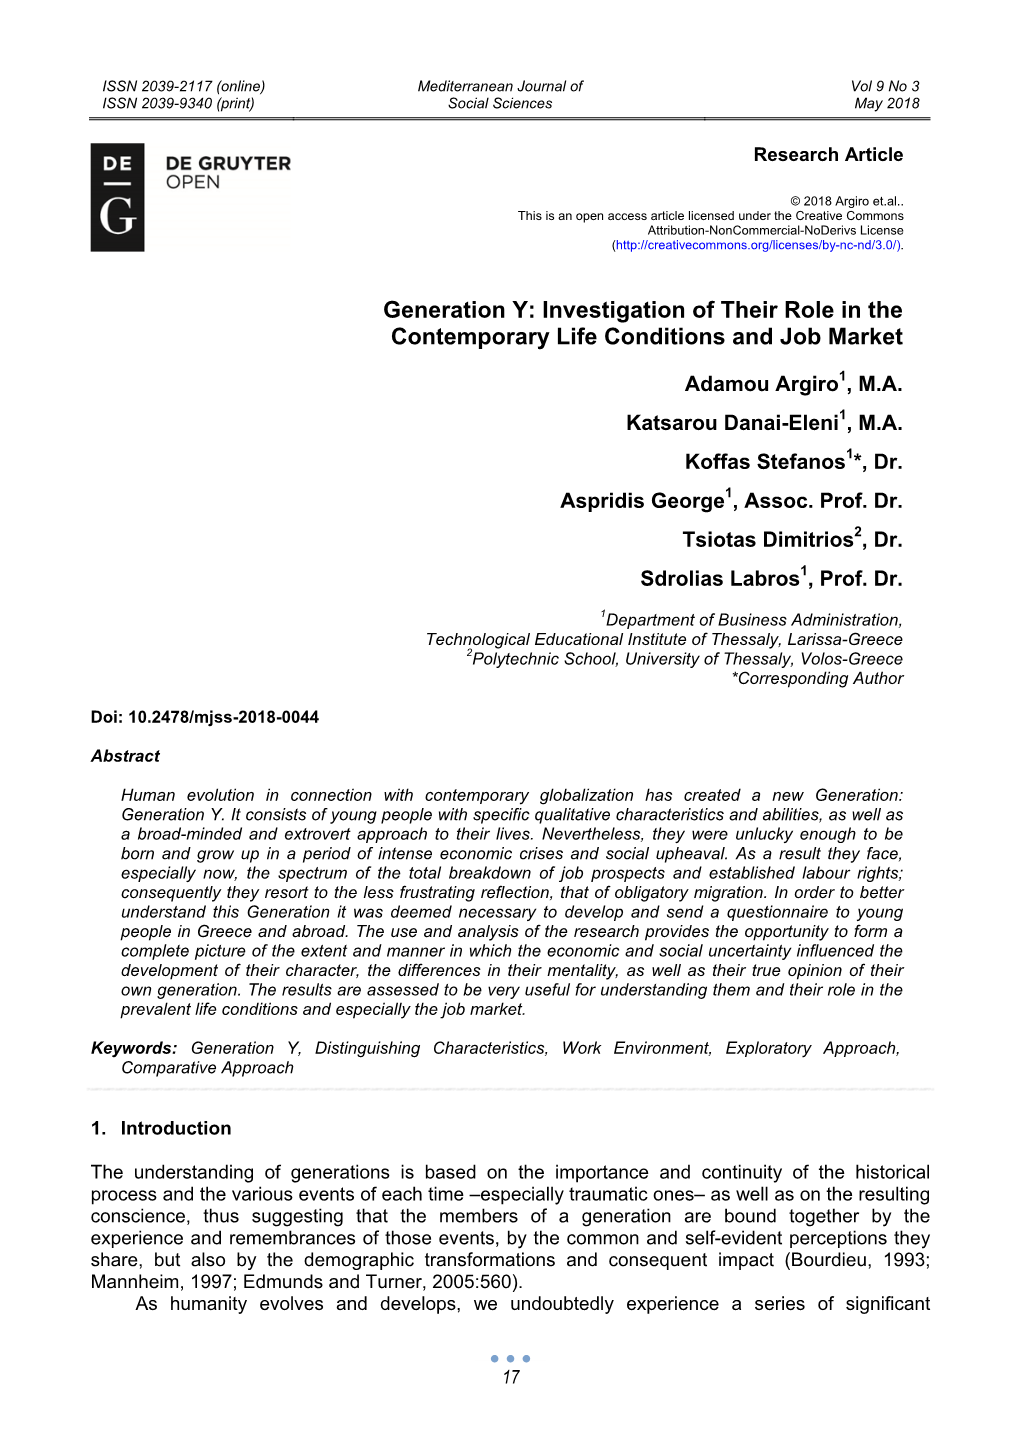 Generation Y: Investigation of Their Role in the Contemporary Life Conditions and Job Market